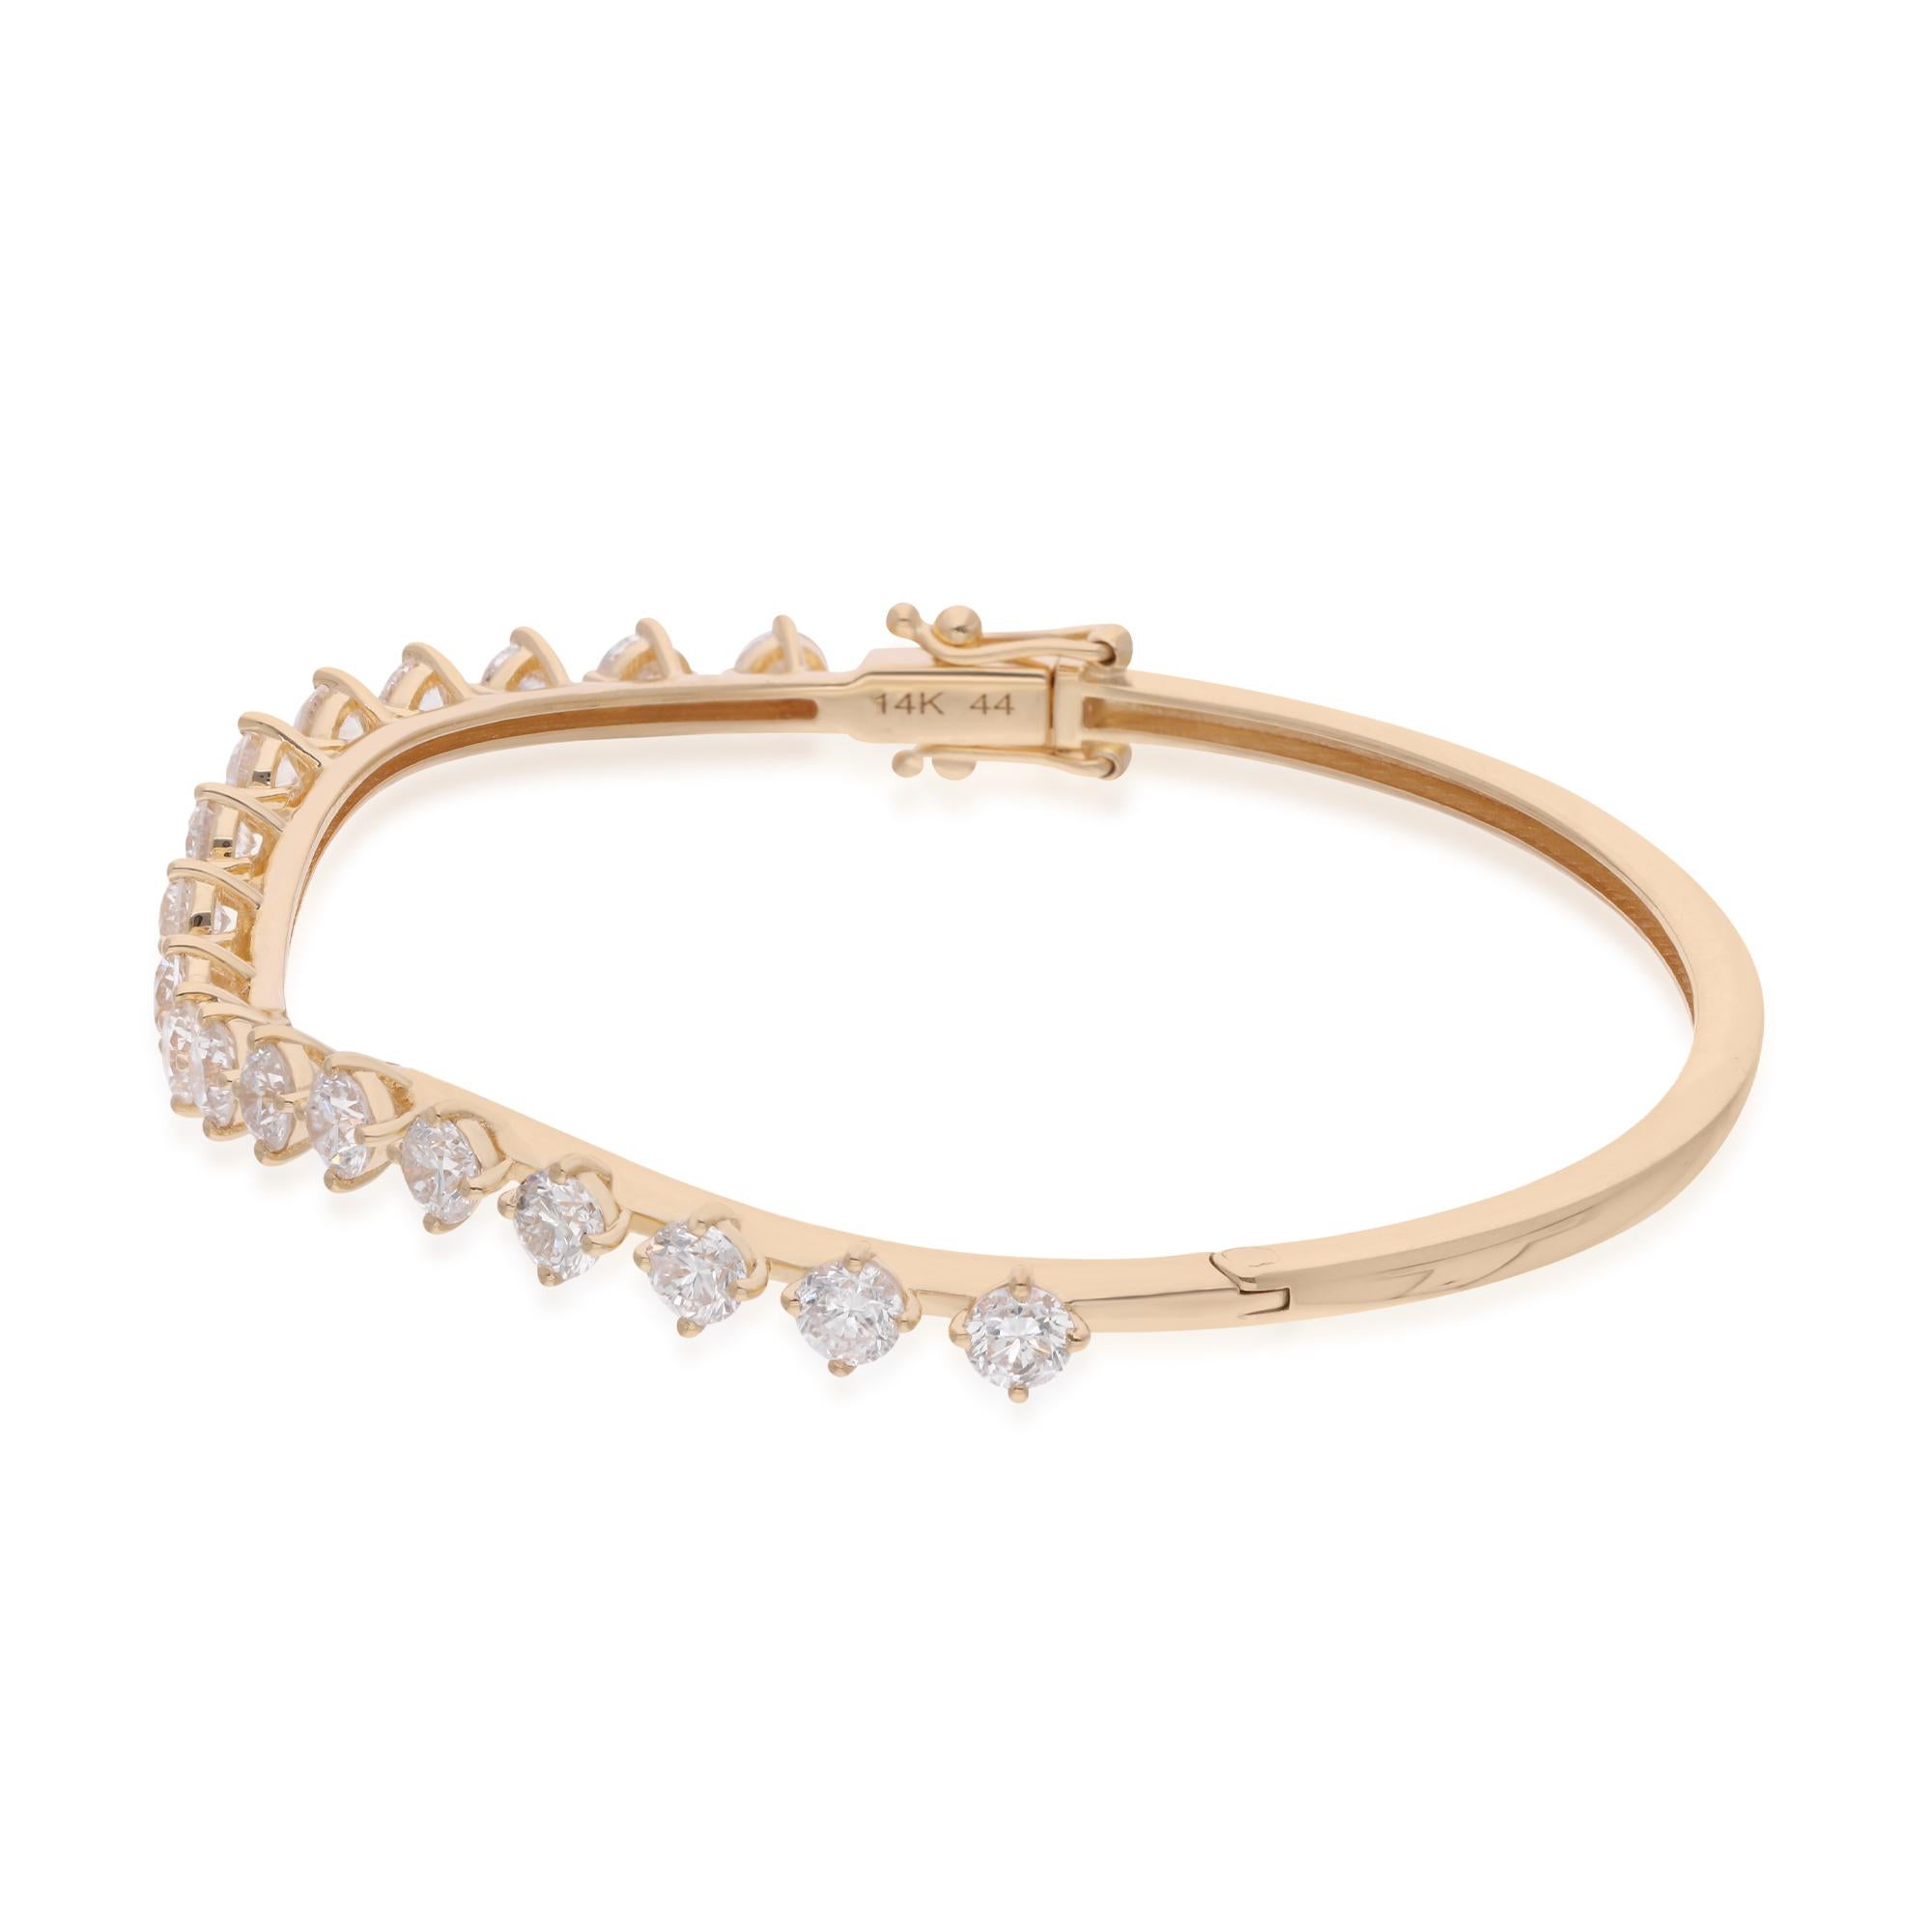 Elevate your wrist with the timeless allure of this Real 3.40 Carat Diamond Bangle Bracelet, meticulously crafted in 14 karat yellow gold. This bracelet is a testament to sophistication and refinement, exuding luxury with its stunning diamonds and